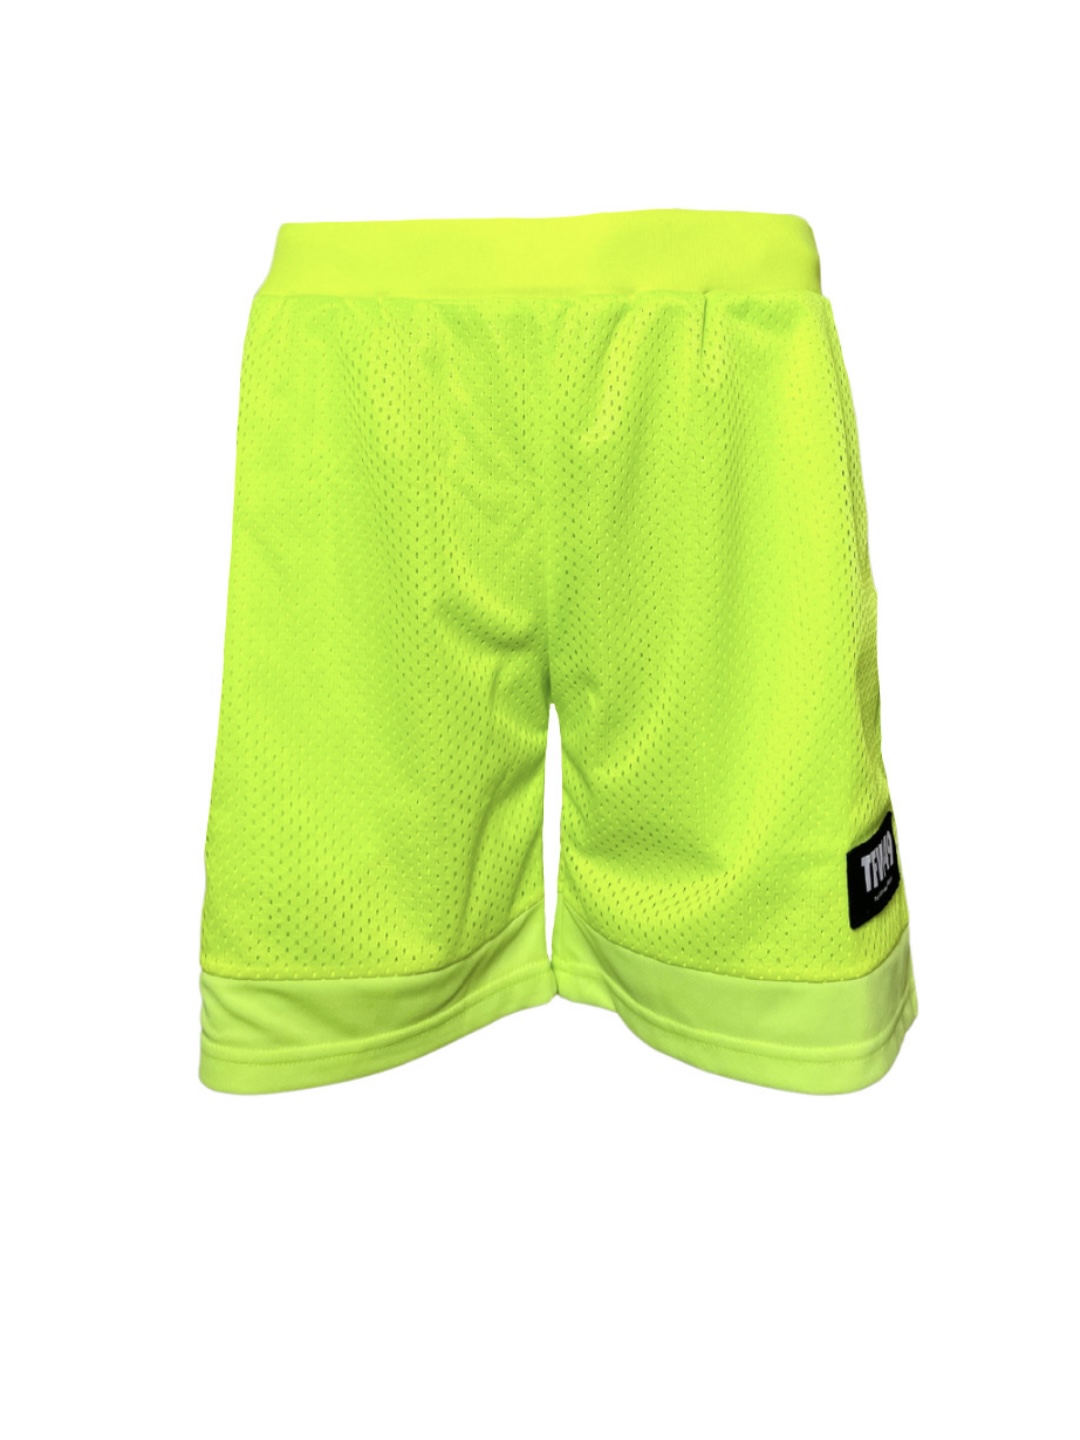 【TFW49】DOUBLE MESH SHORTS